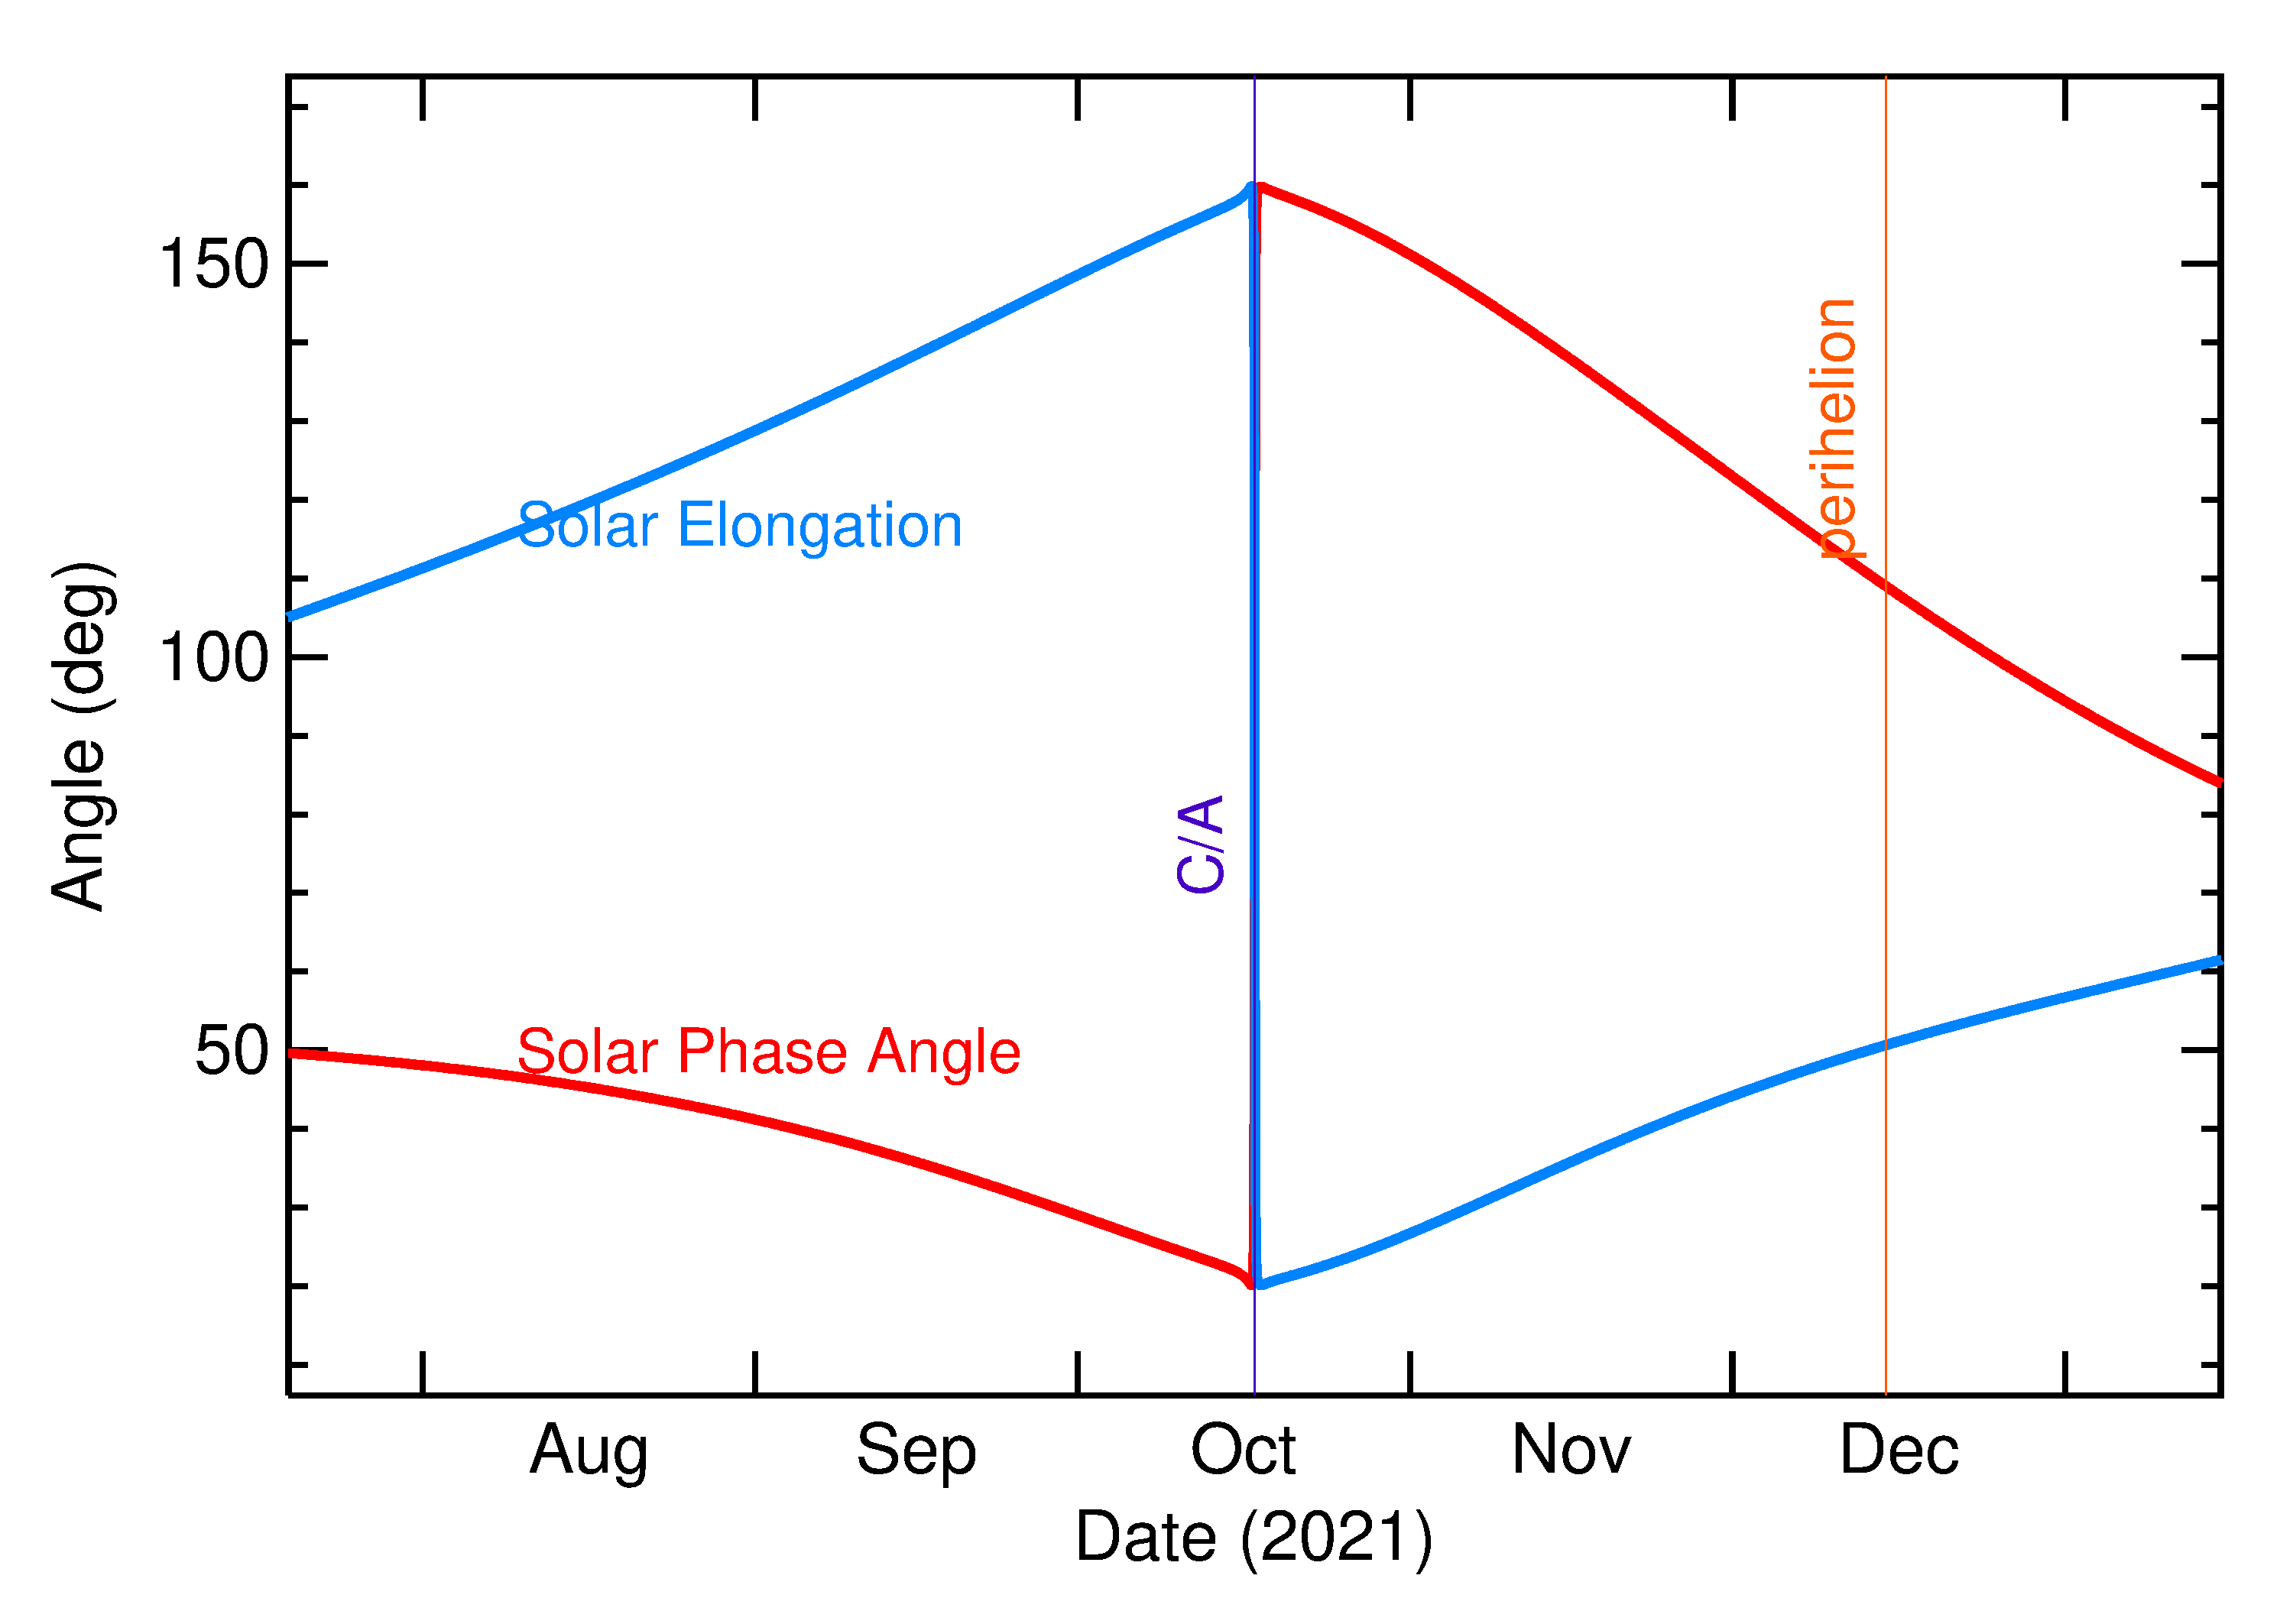 Solar Elongation and Solar Phase Angle of 2021 UL in the months around closest approach